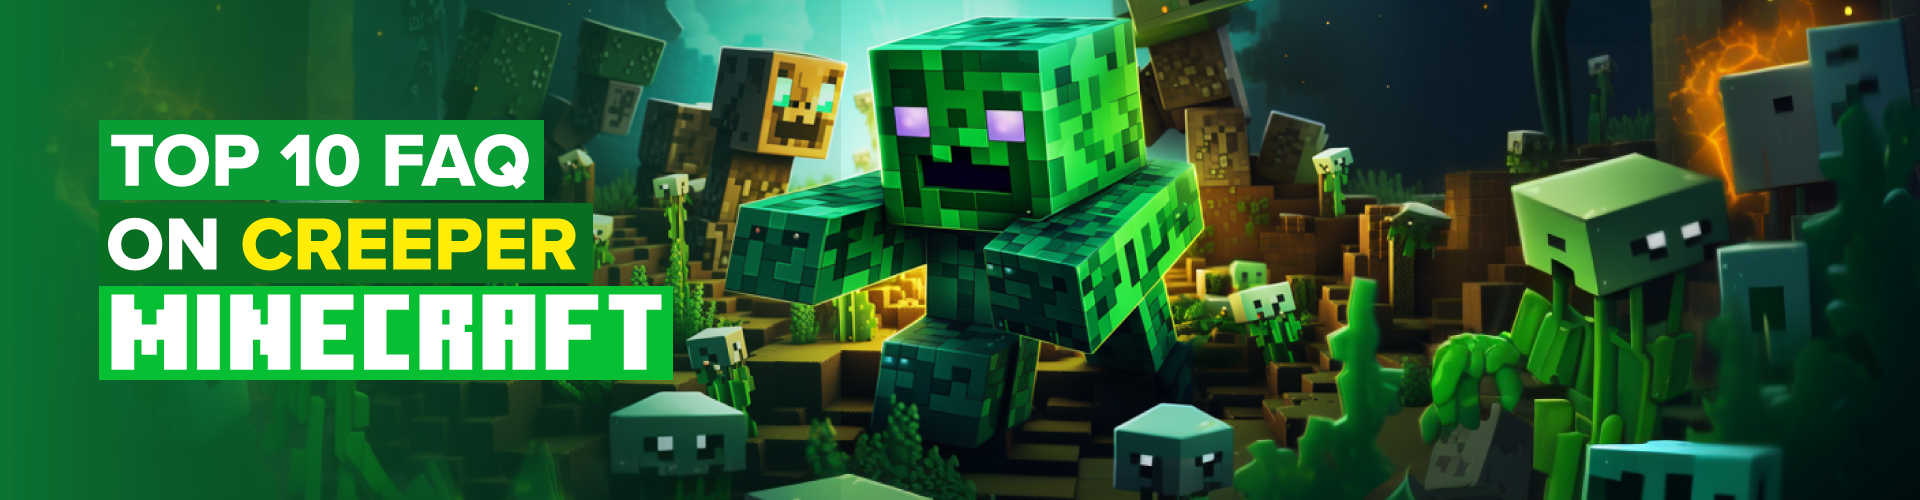 FAQ on Creepers in minecraft